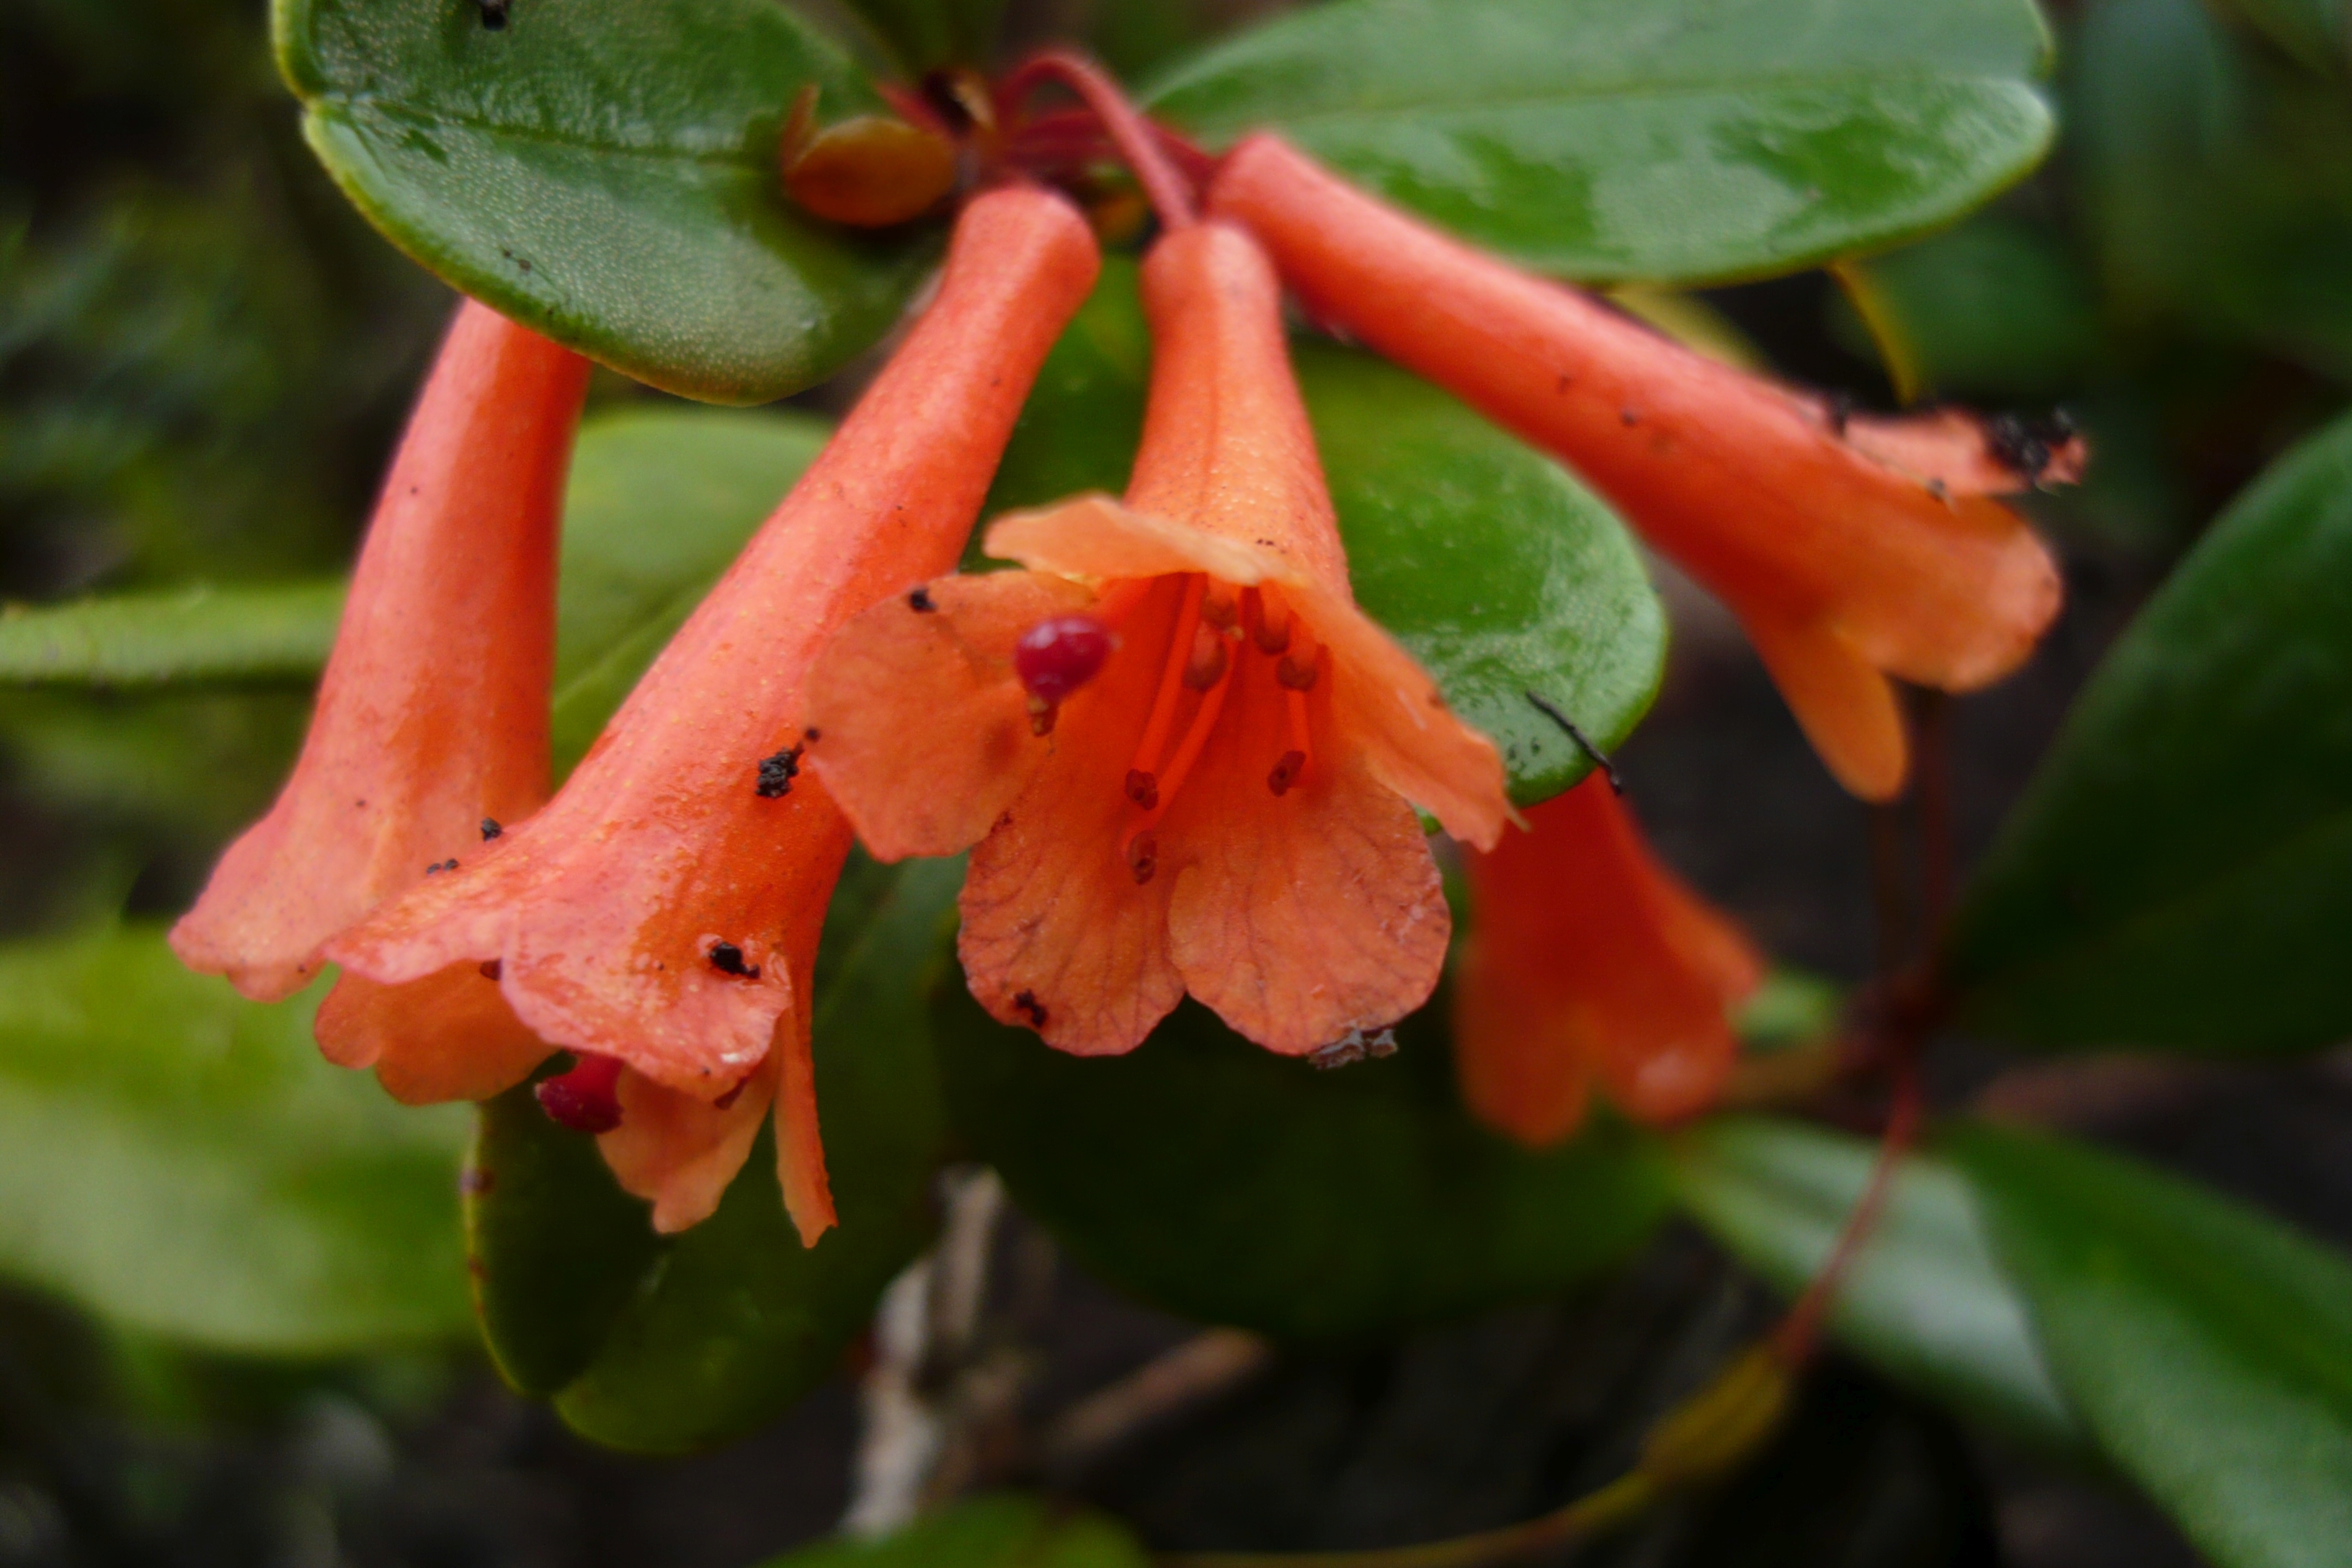 A photograph of the inflorescence of Rhododendron benomense